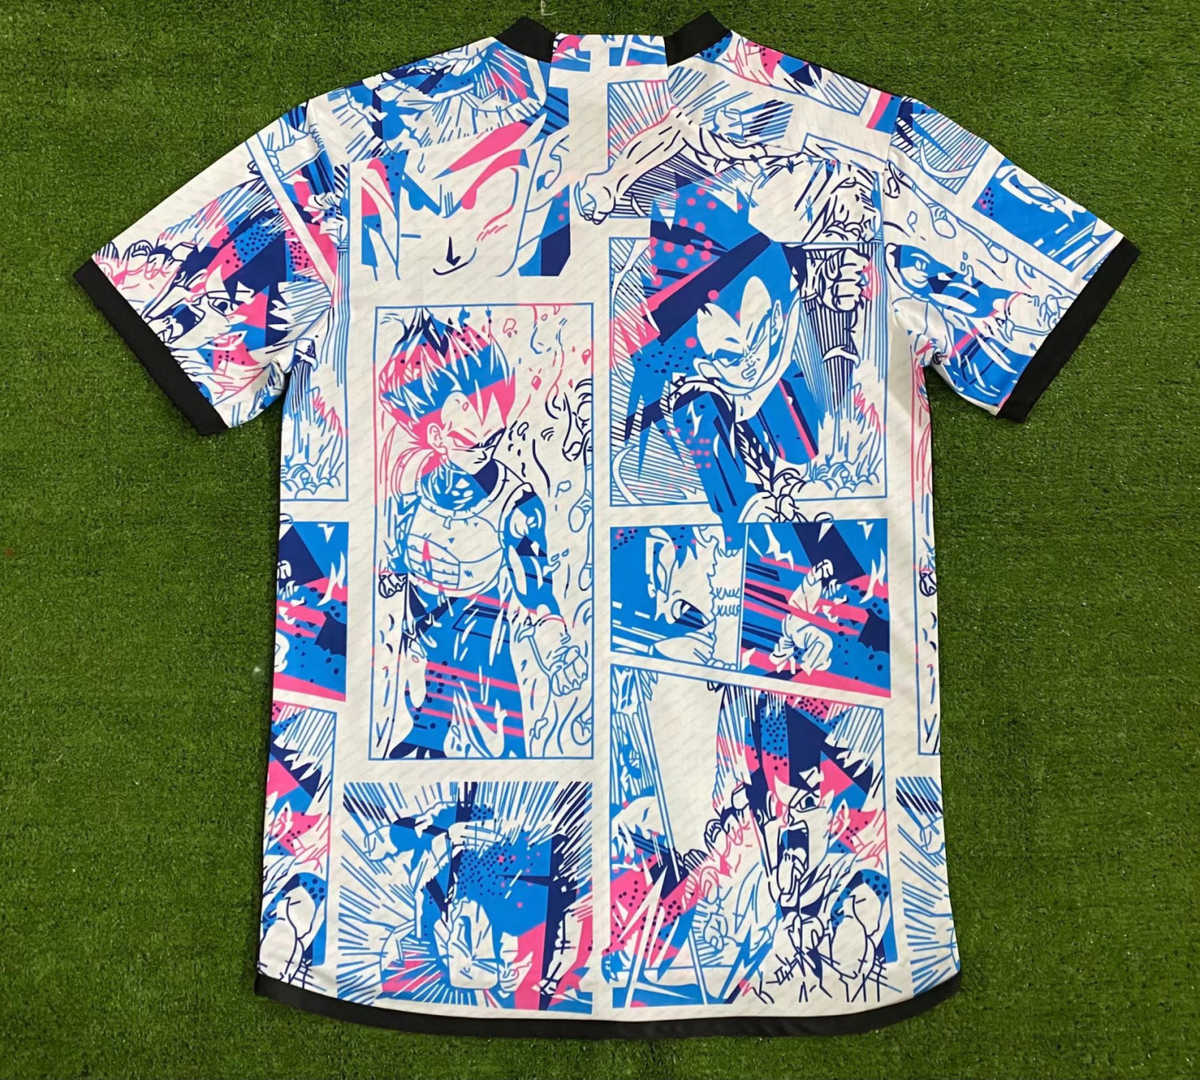 Japan Soccer Jersey Replica Anime White 2022 Mens (Special Edition)